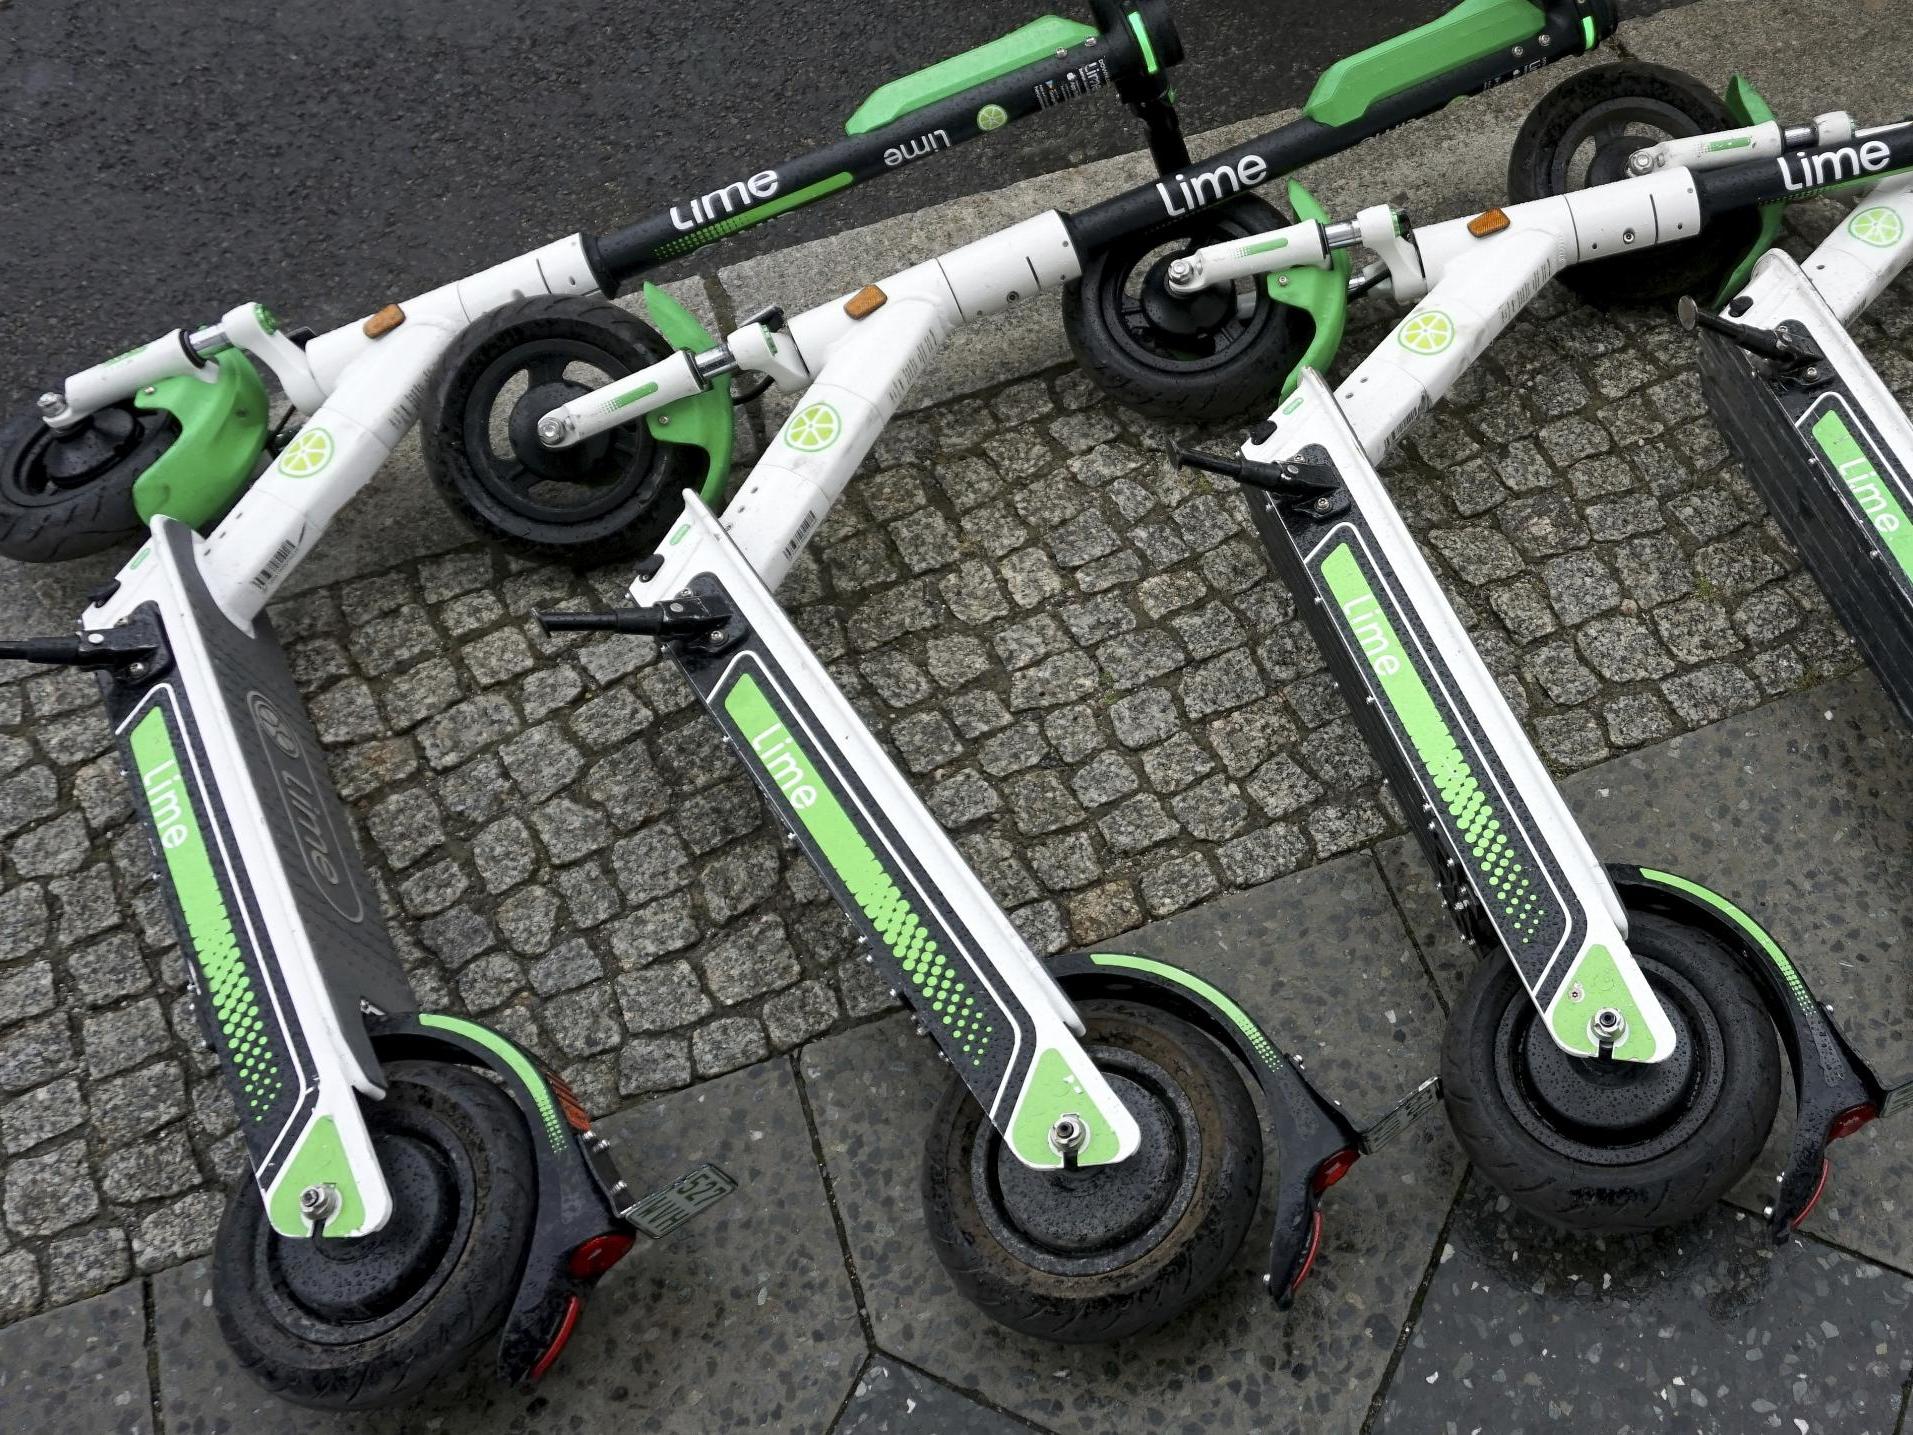 Rental e-scooters lie on a pavement in Berlin, Germany